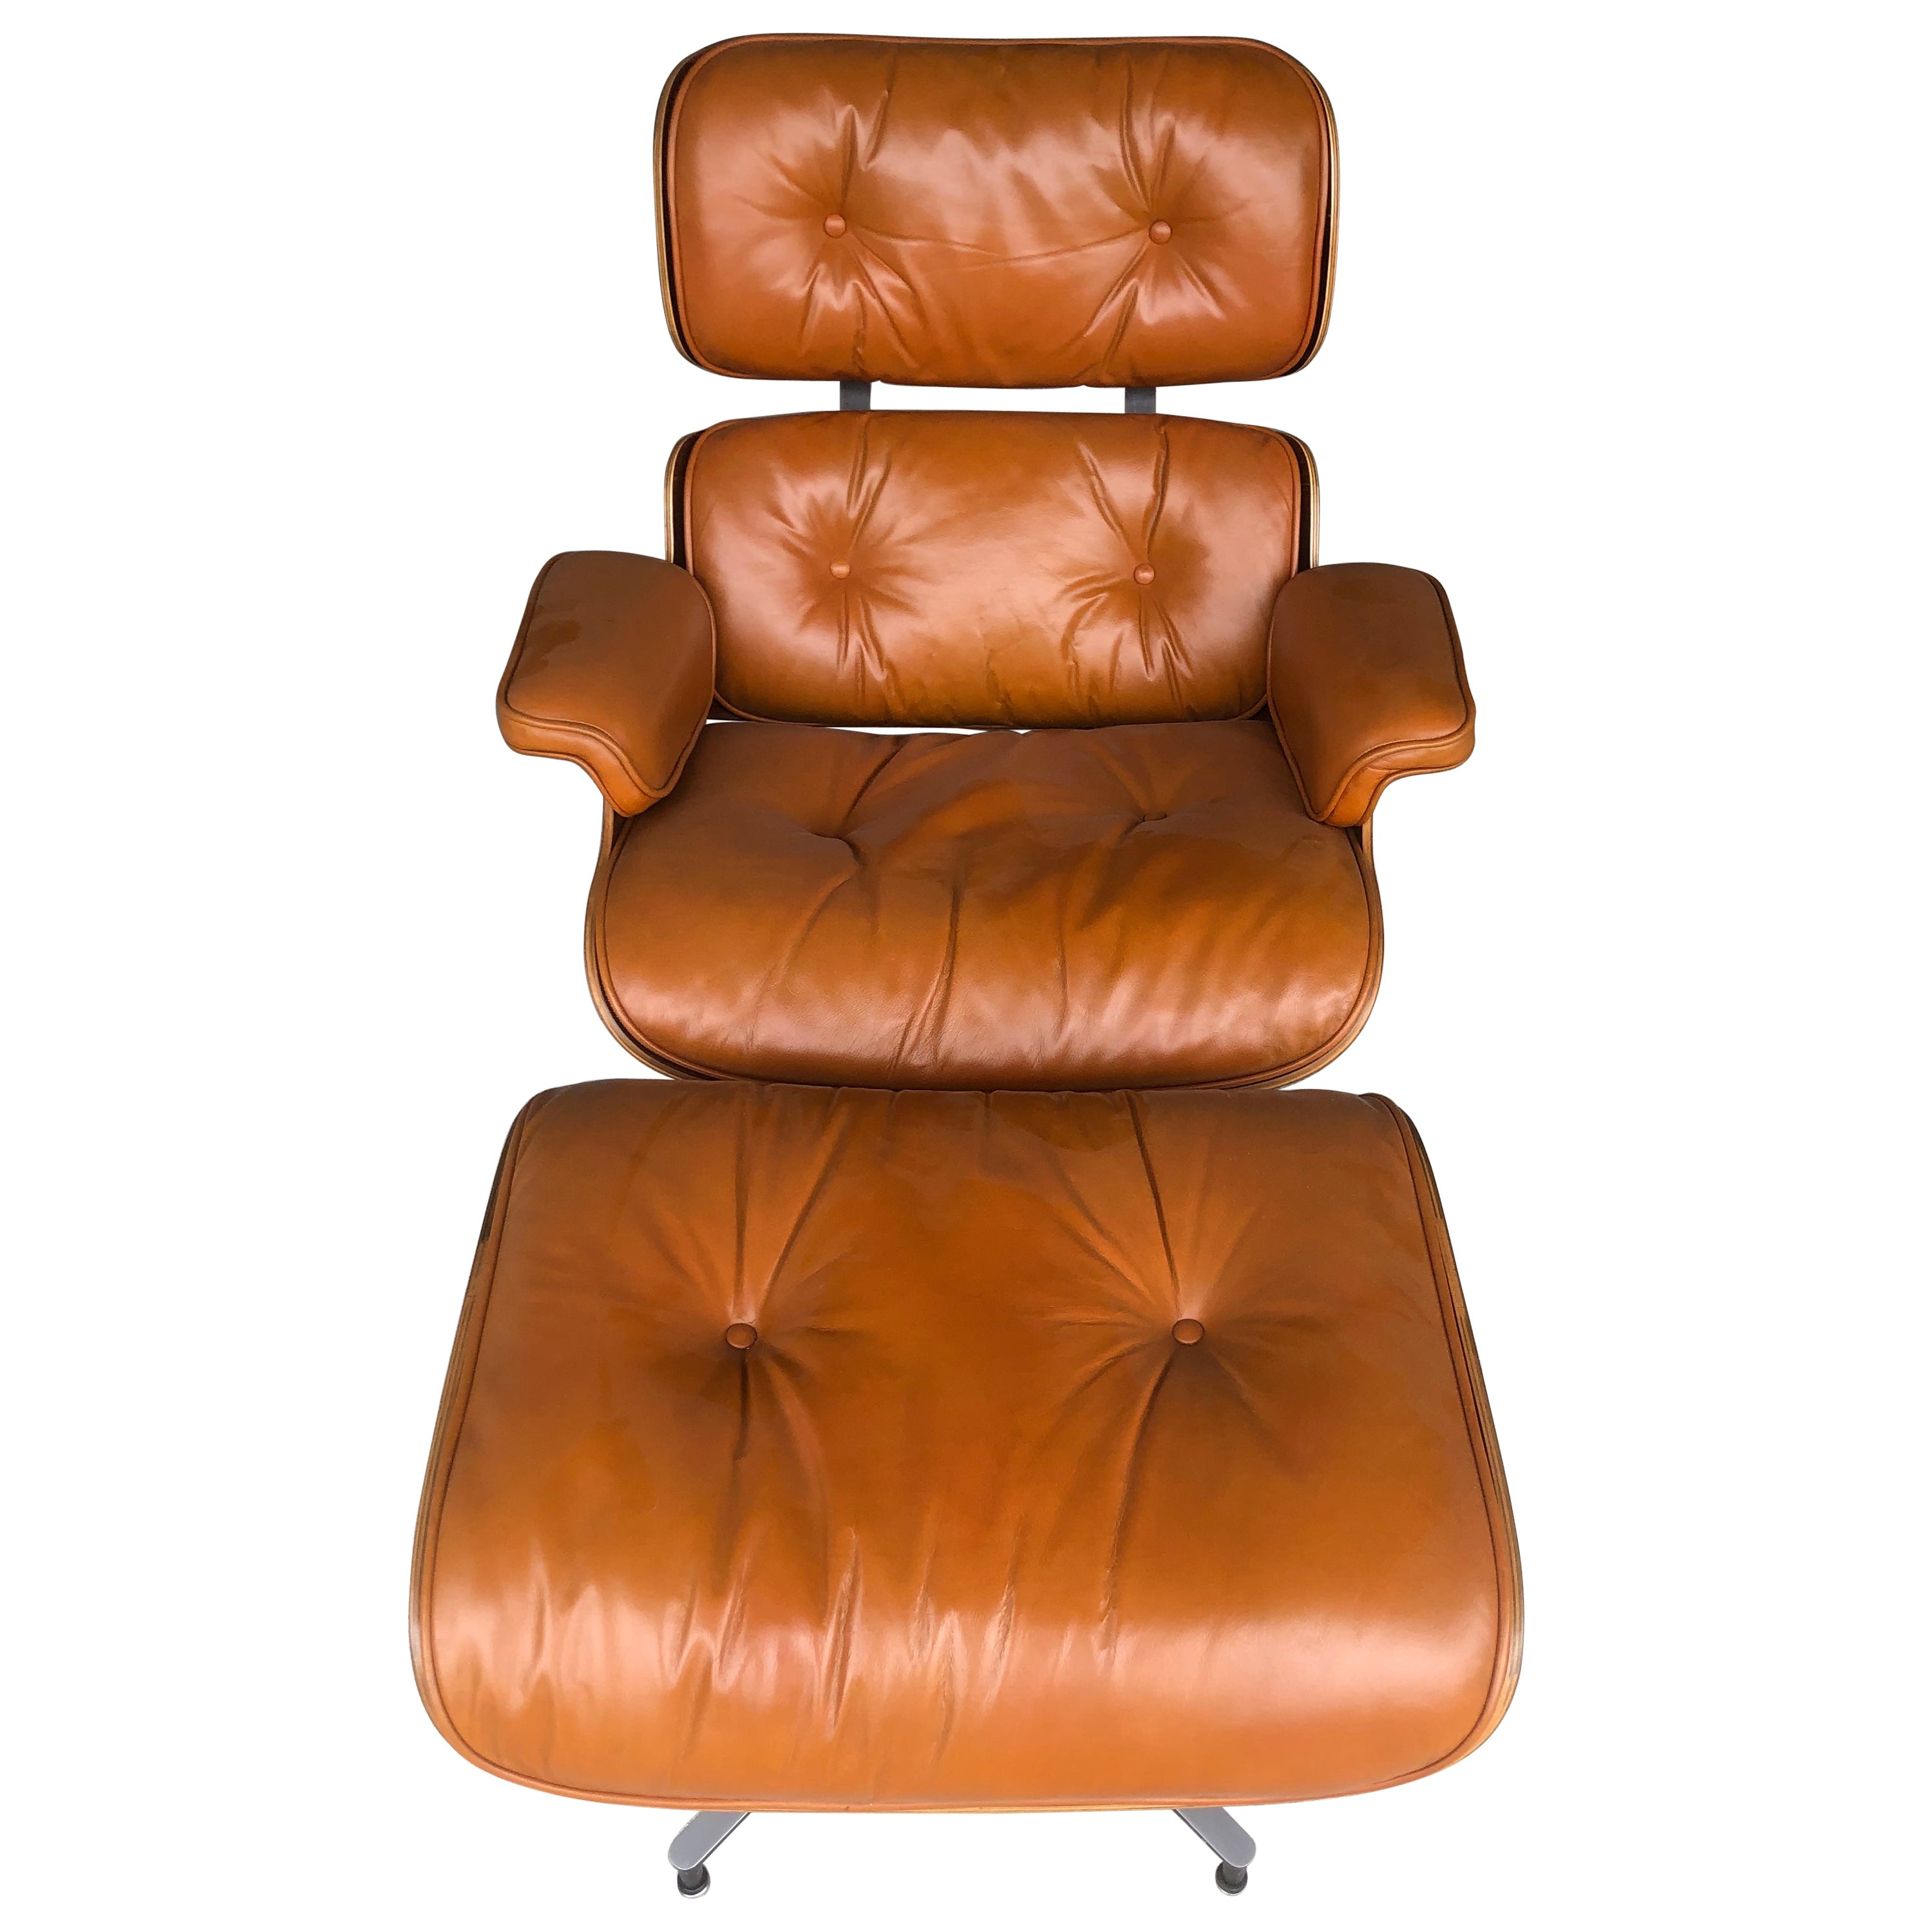 Near Mint Condition 1960s Herman Miller Eames Lounge Chair ...